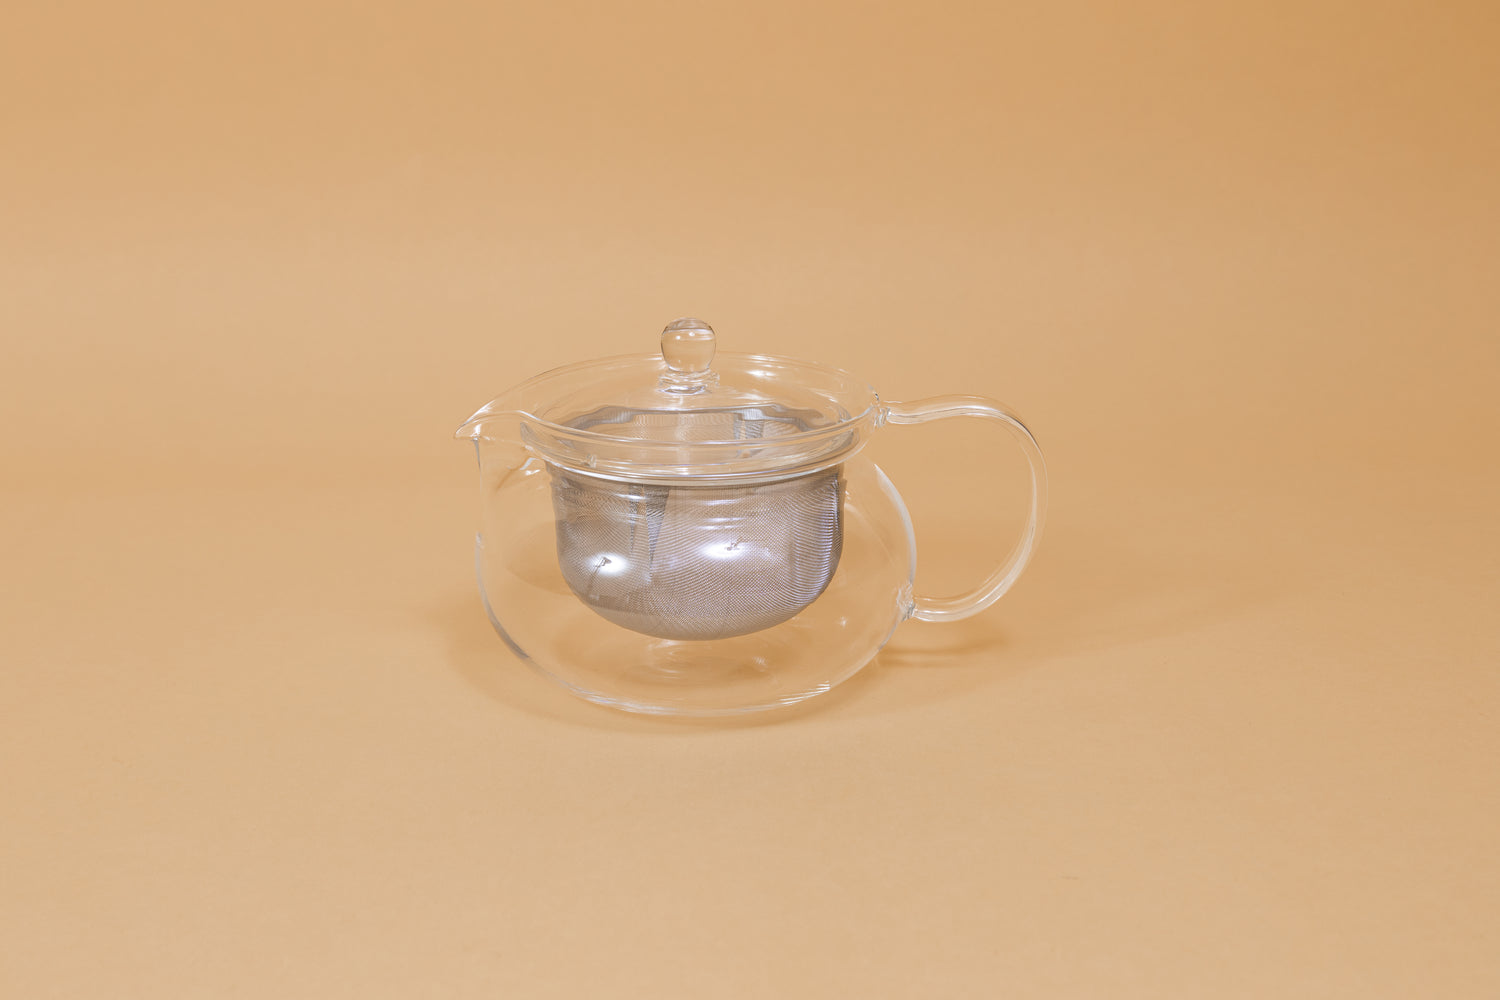 All glass round tea pot with flared top, all glass lid and handle, Metal mesh filter basket insert.